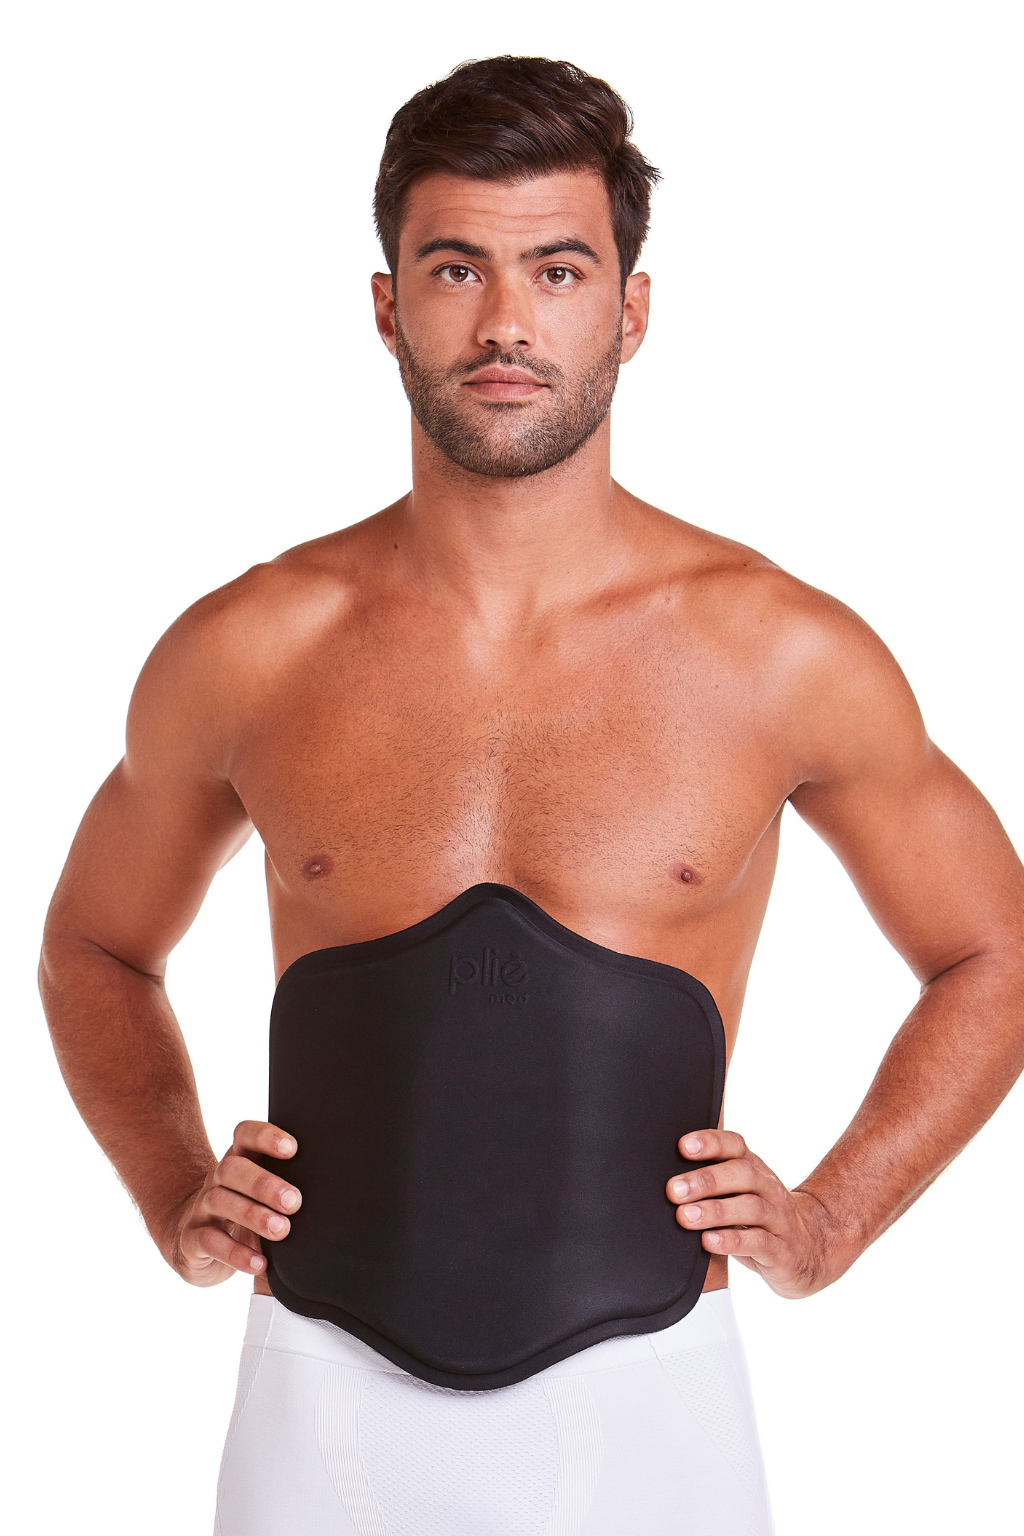 Advanced Unisex Abdominal Support pad for Postoperative Recovery